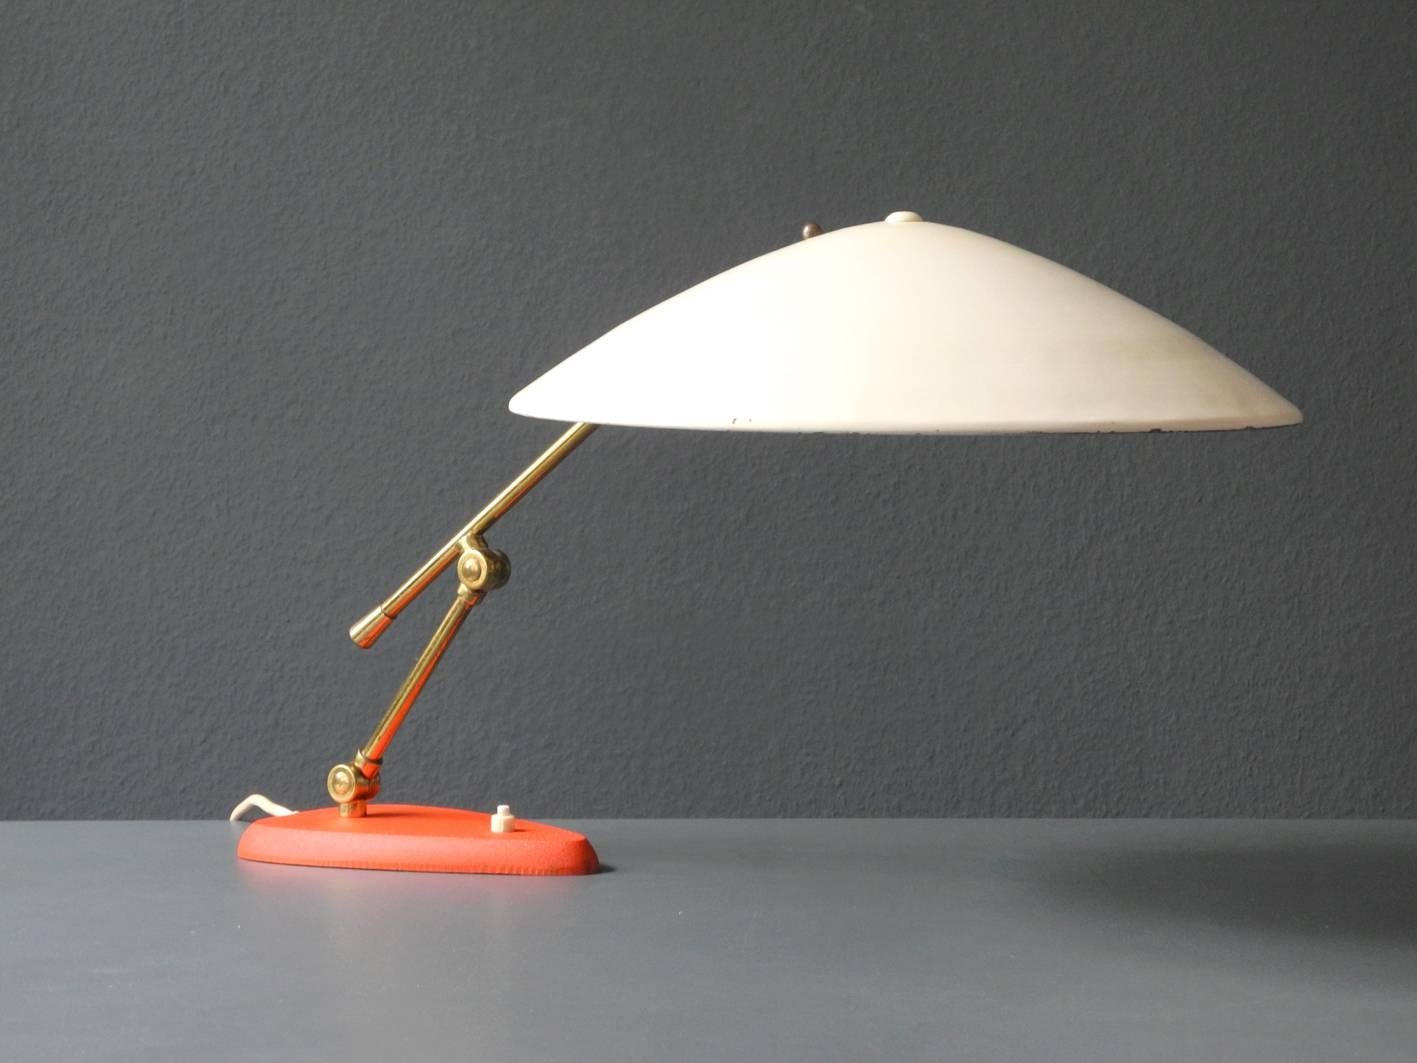 Exceptional large Mid-Century Modern Italian table lamp.
Very nice design with two brass joints for different positions.
Shade in beige painted metal.
Feet made of heavy iron, rod joints made of brass
100% original condition and fully